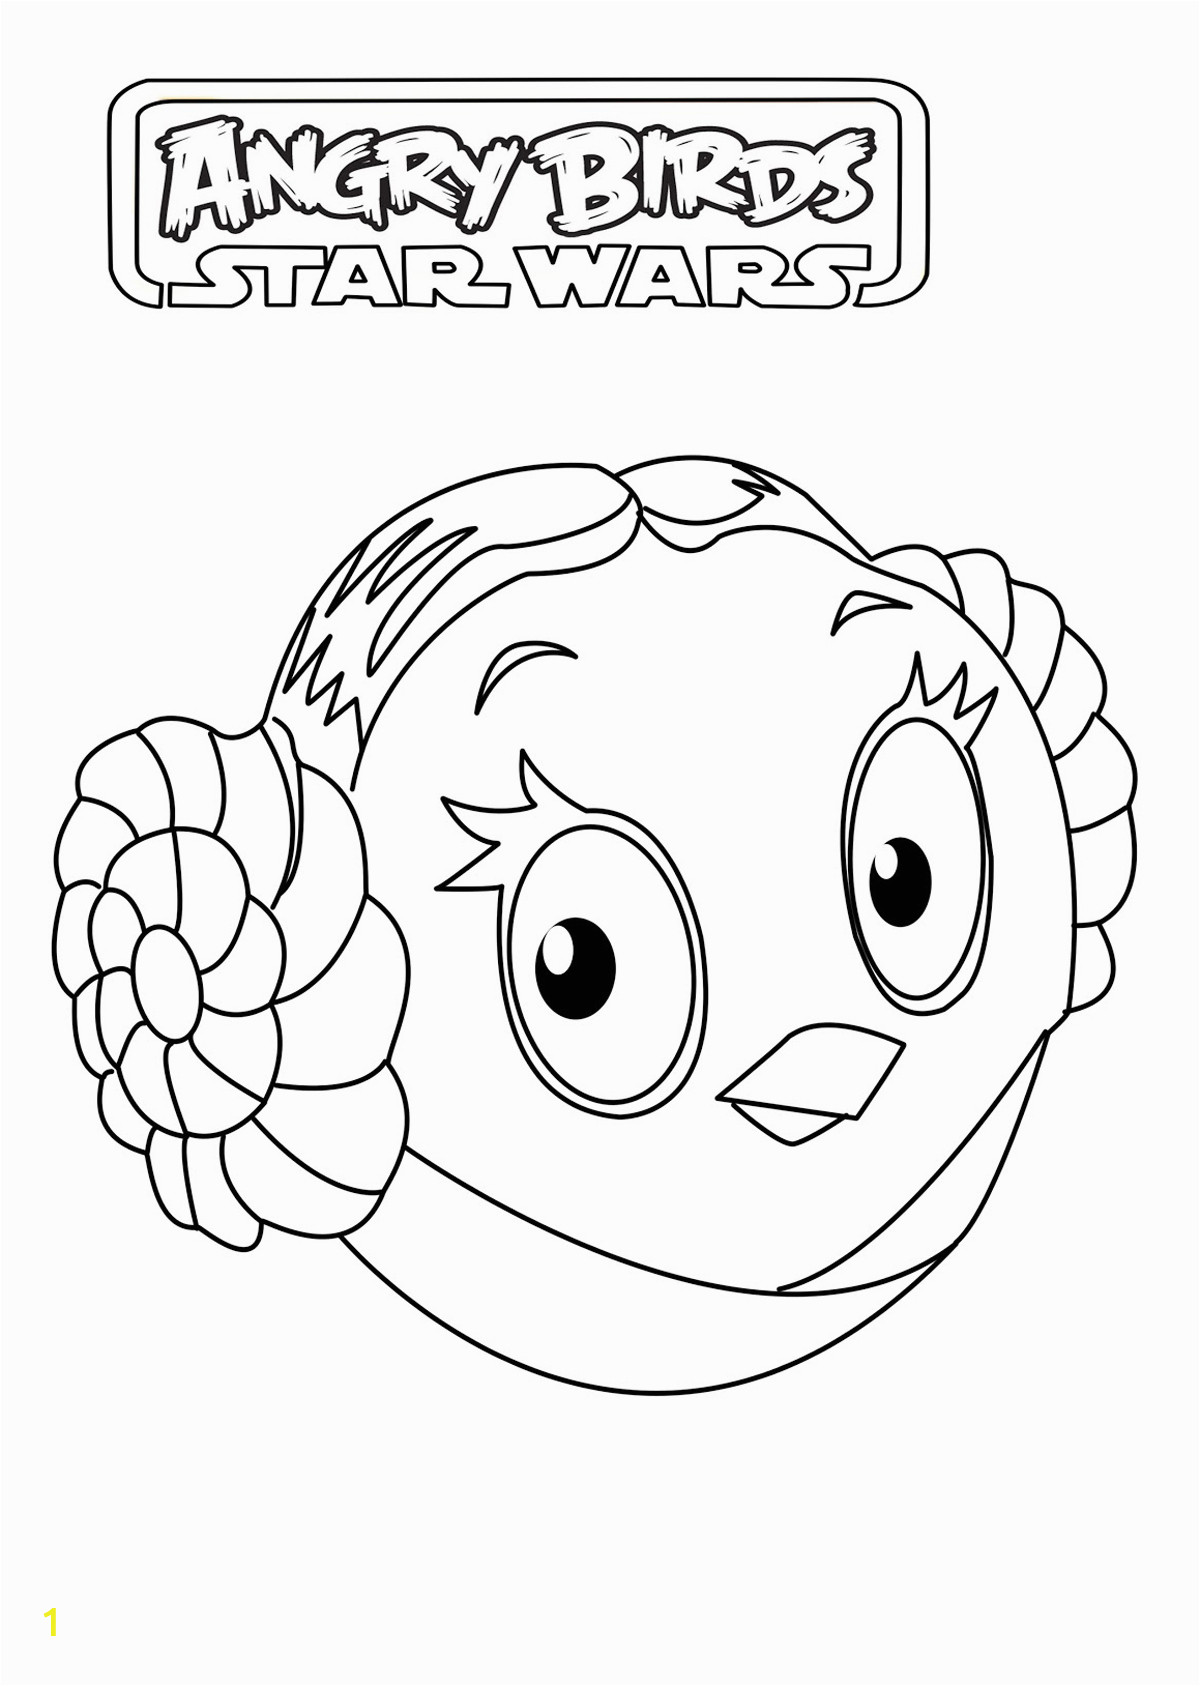 image=angry birds star wars Coloring for kids angry birds star wars 1